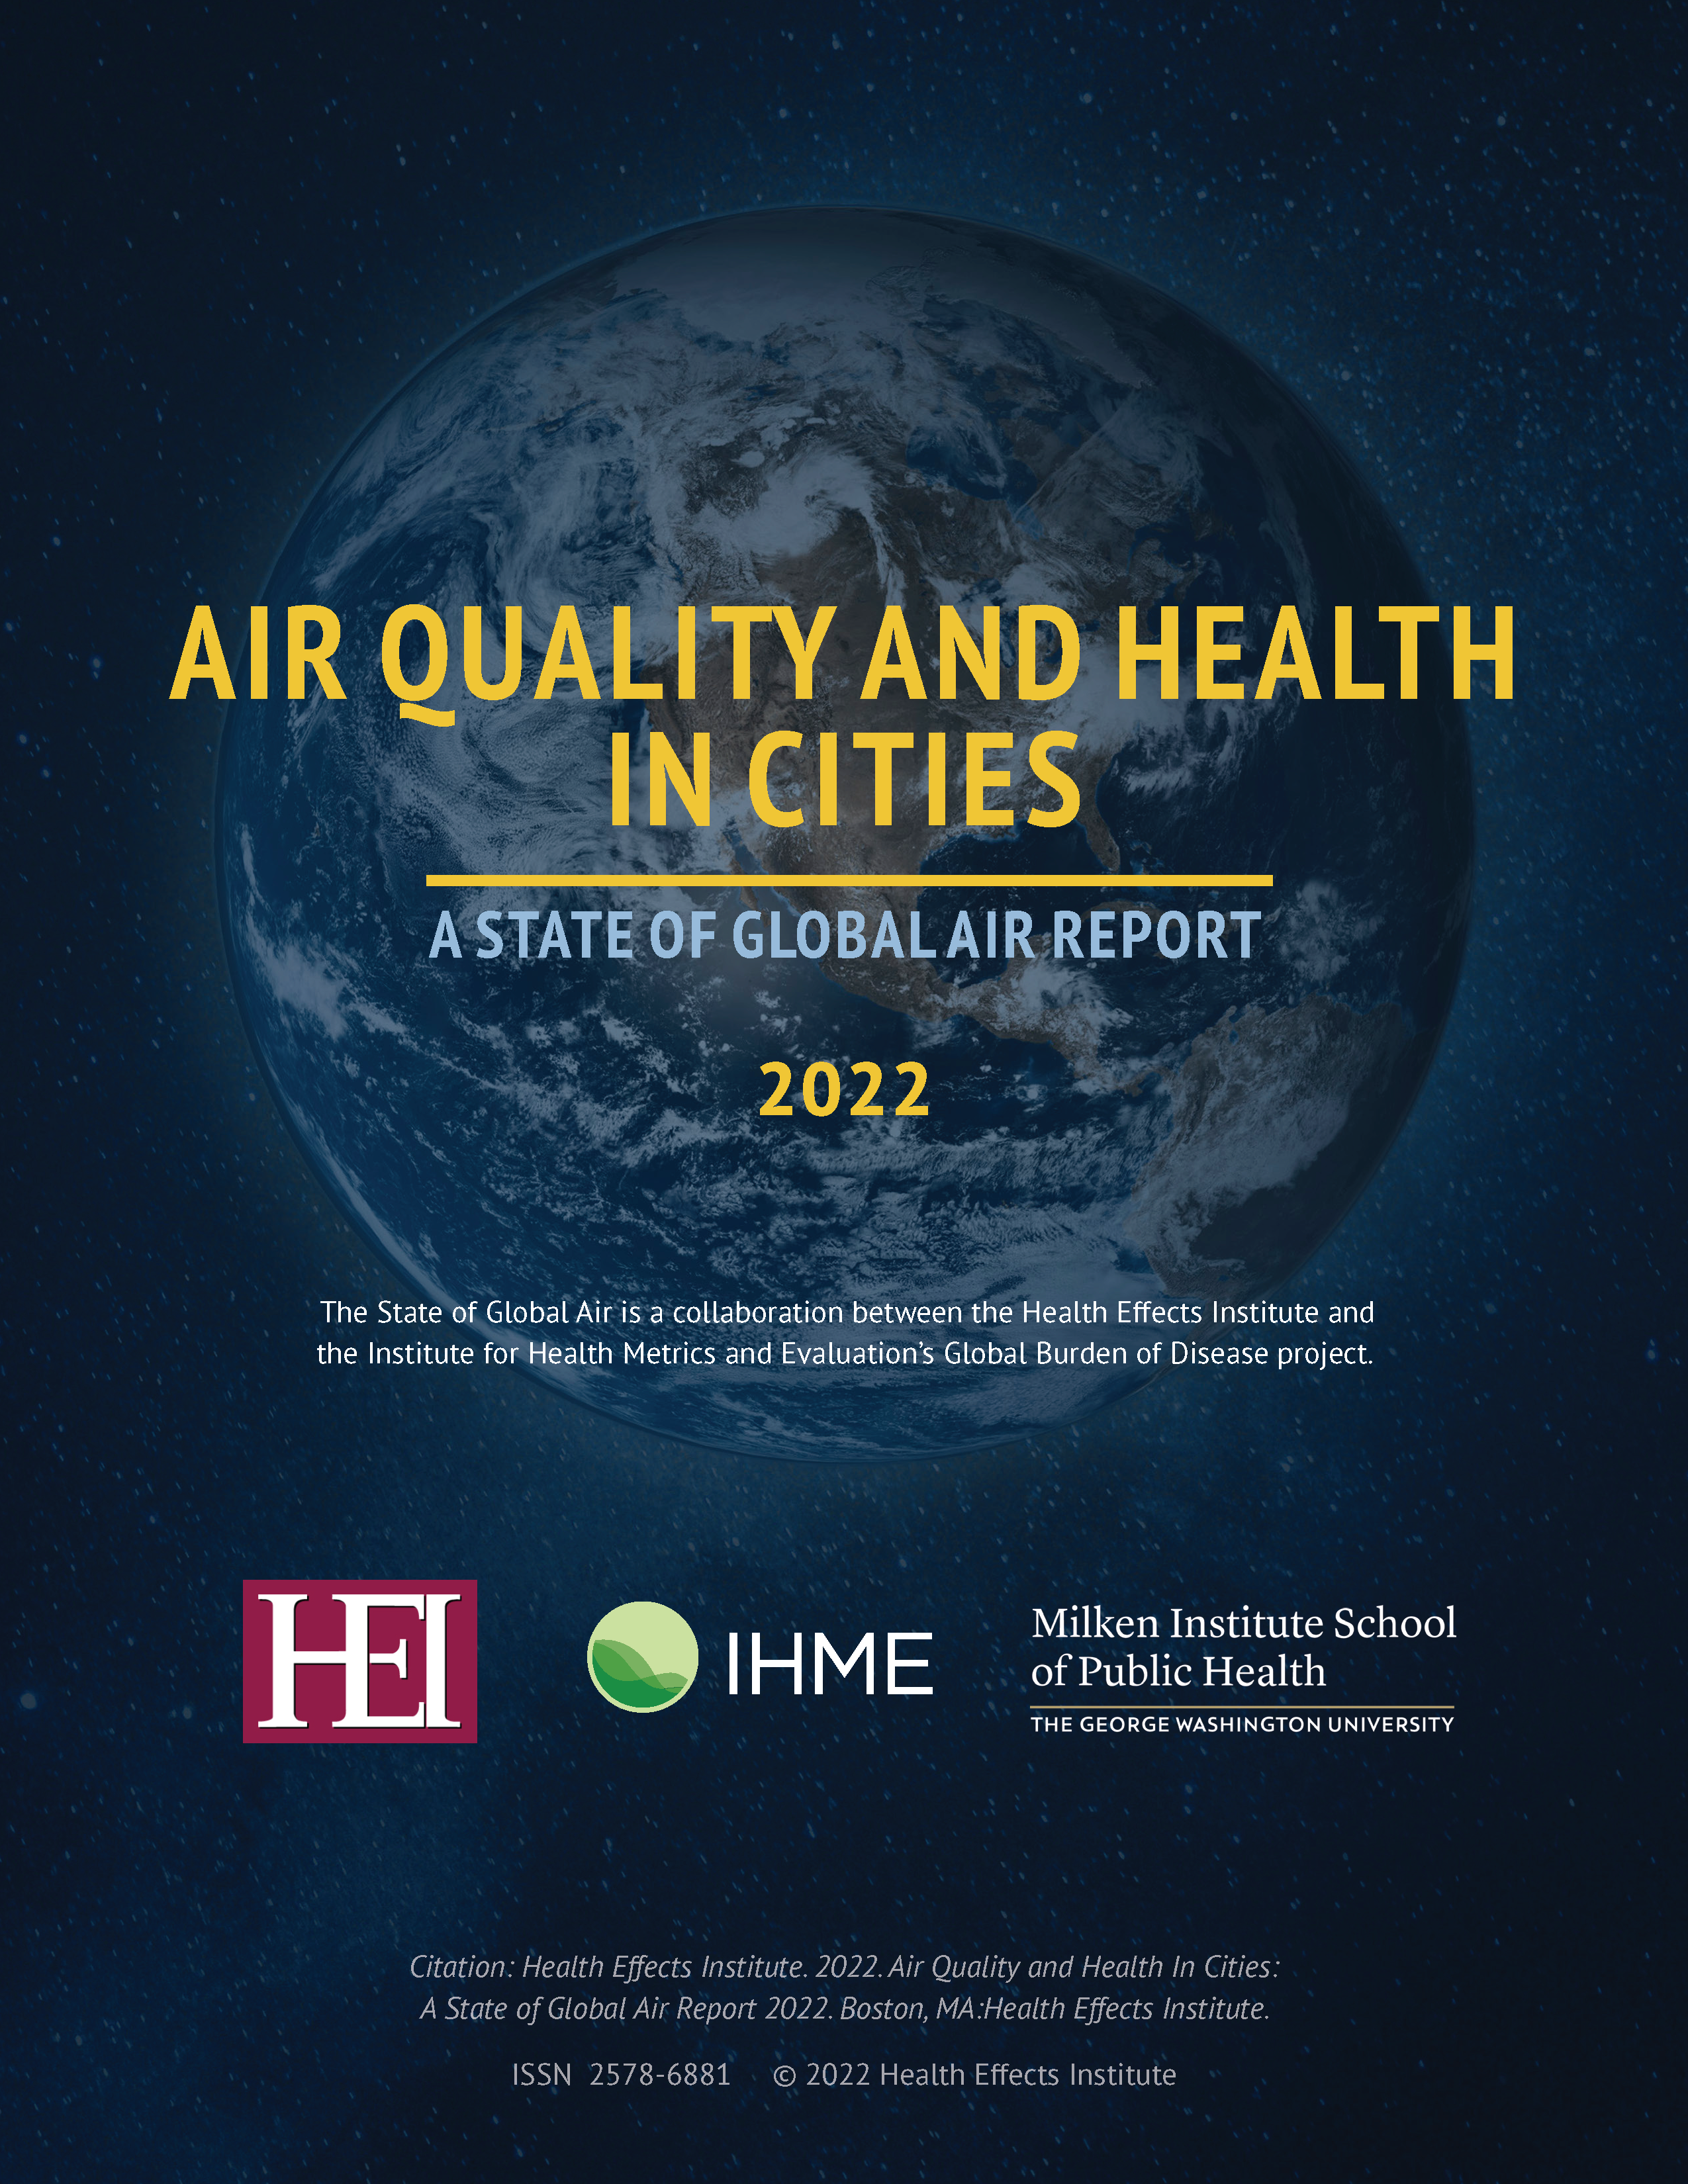 Air quality and health in cities